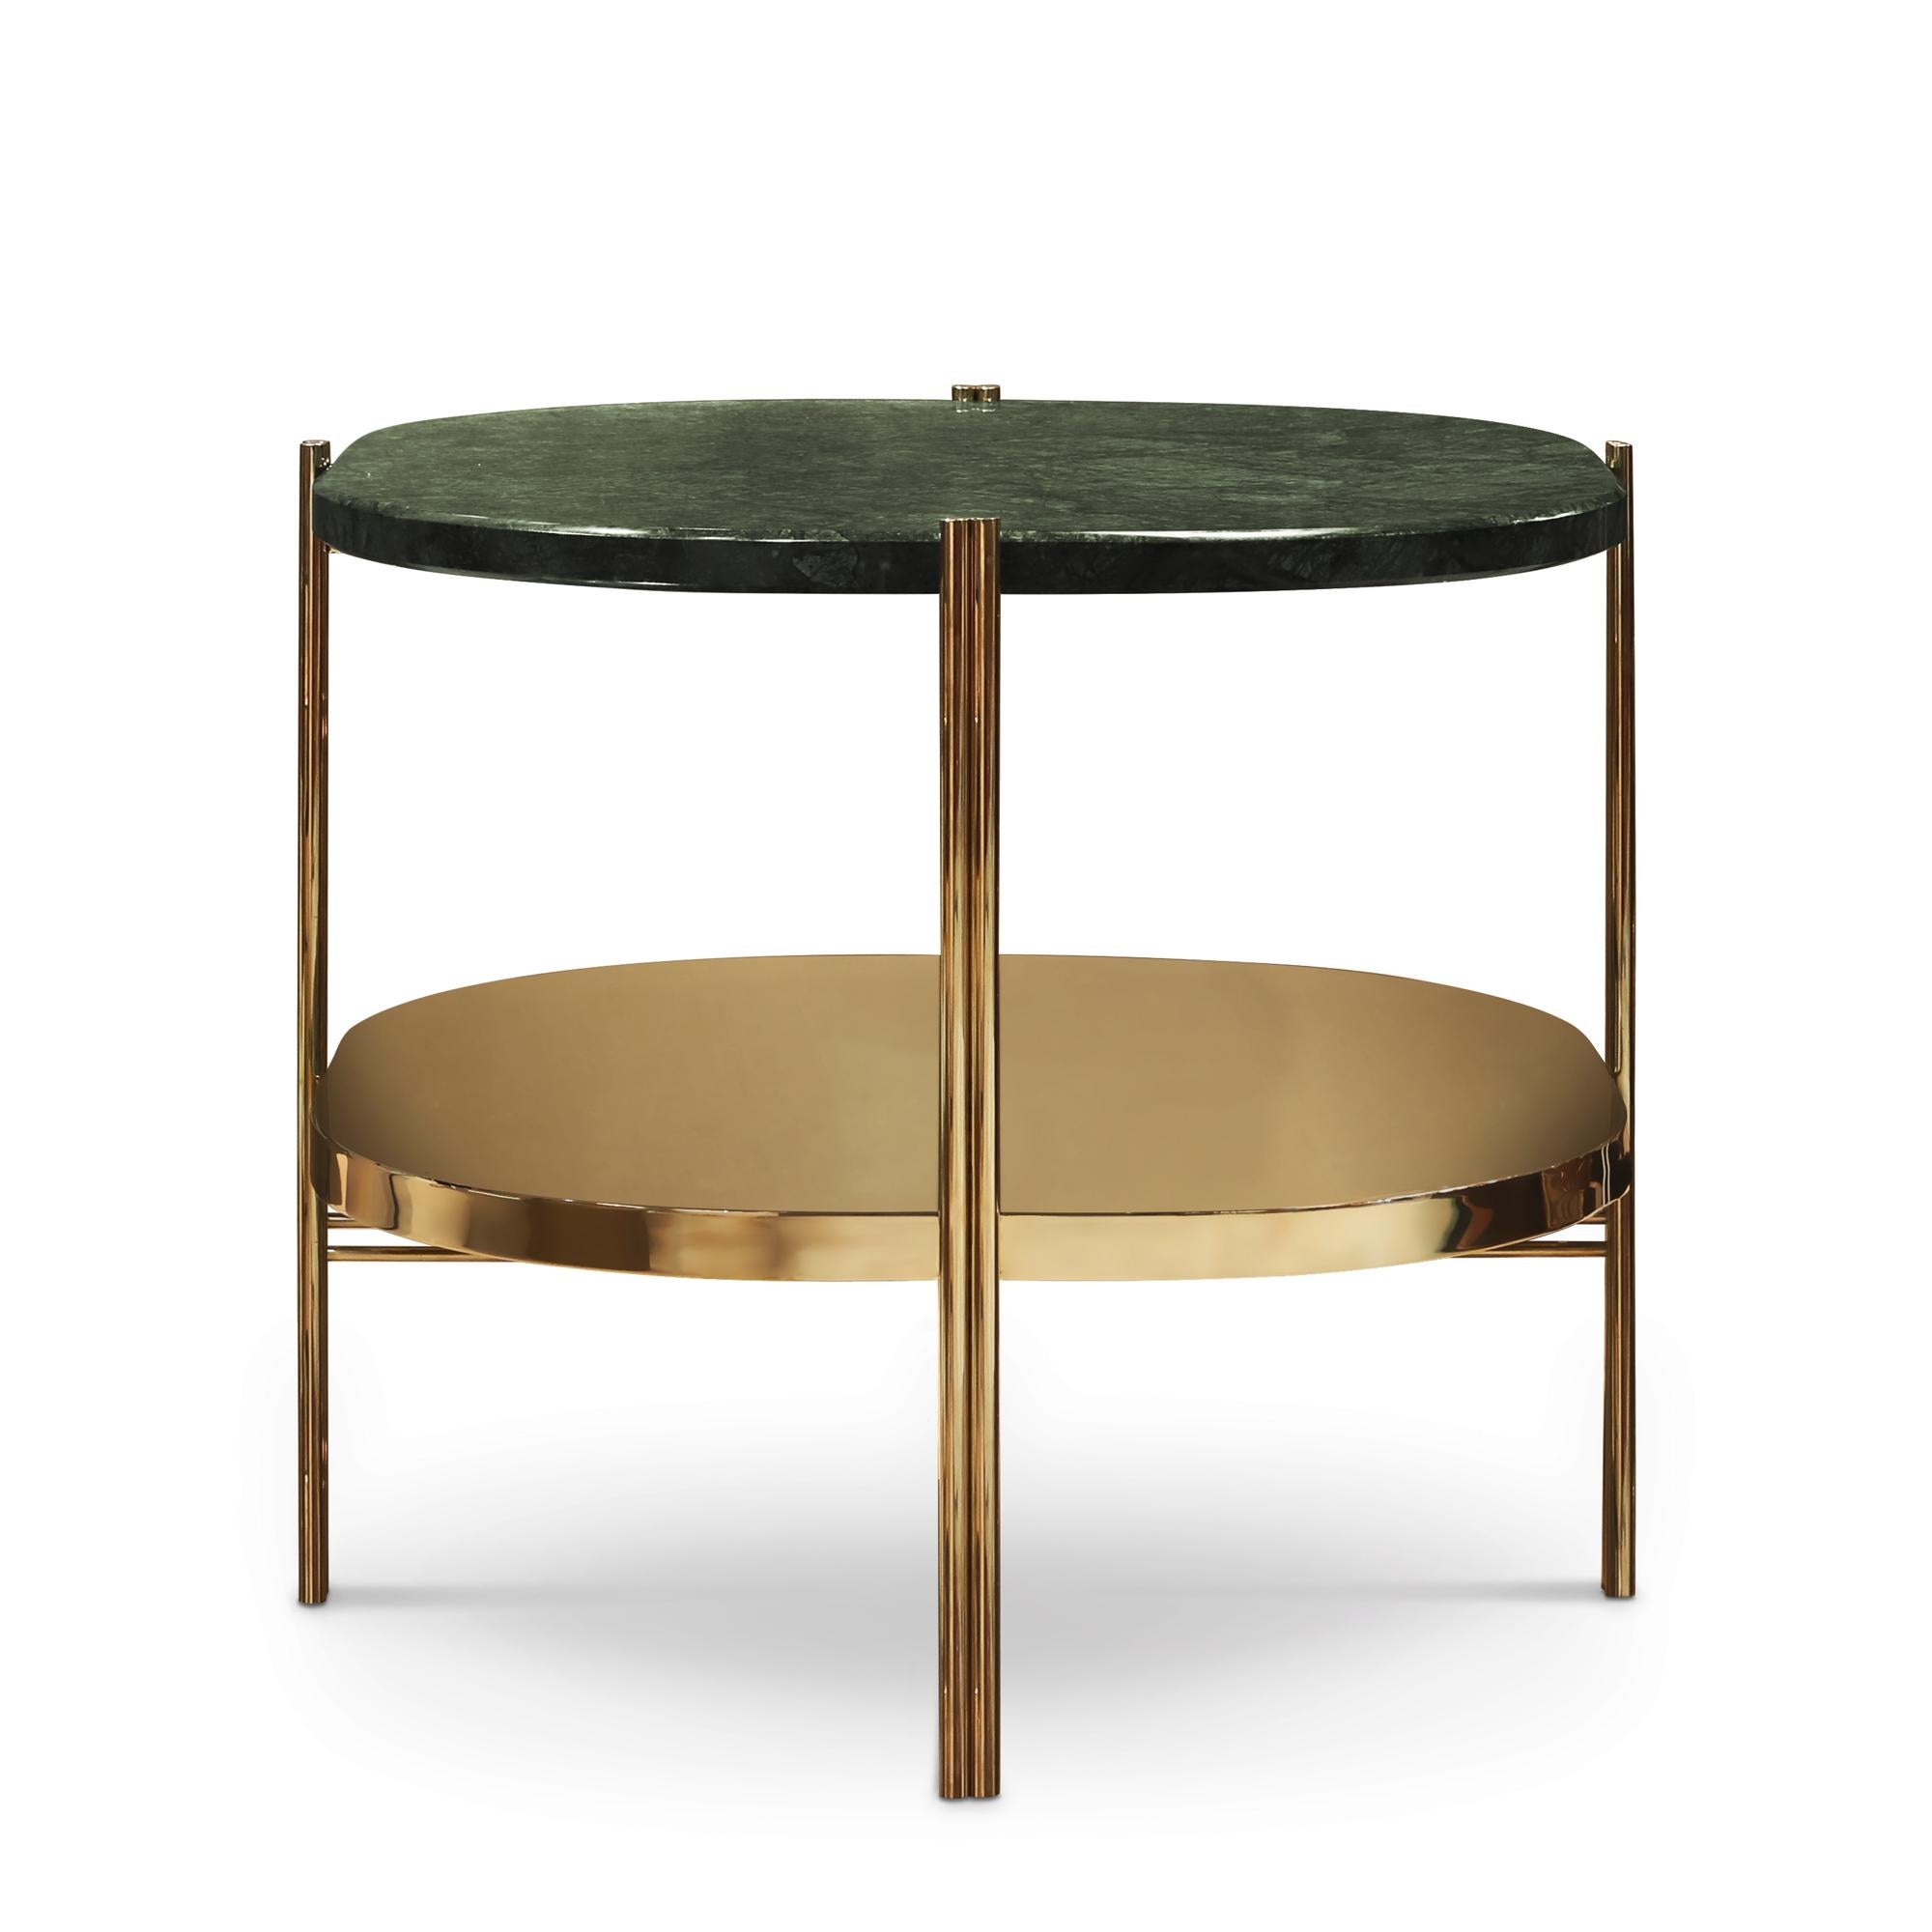 Side table Guatemala marble with structure
in solid polished brass with solid Guatemala
marble top.